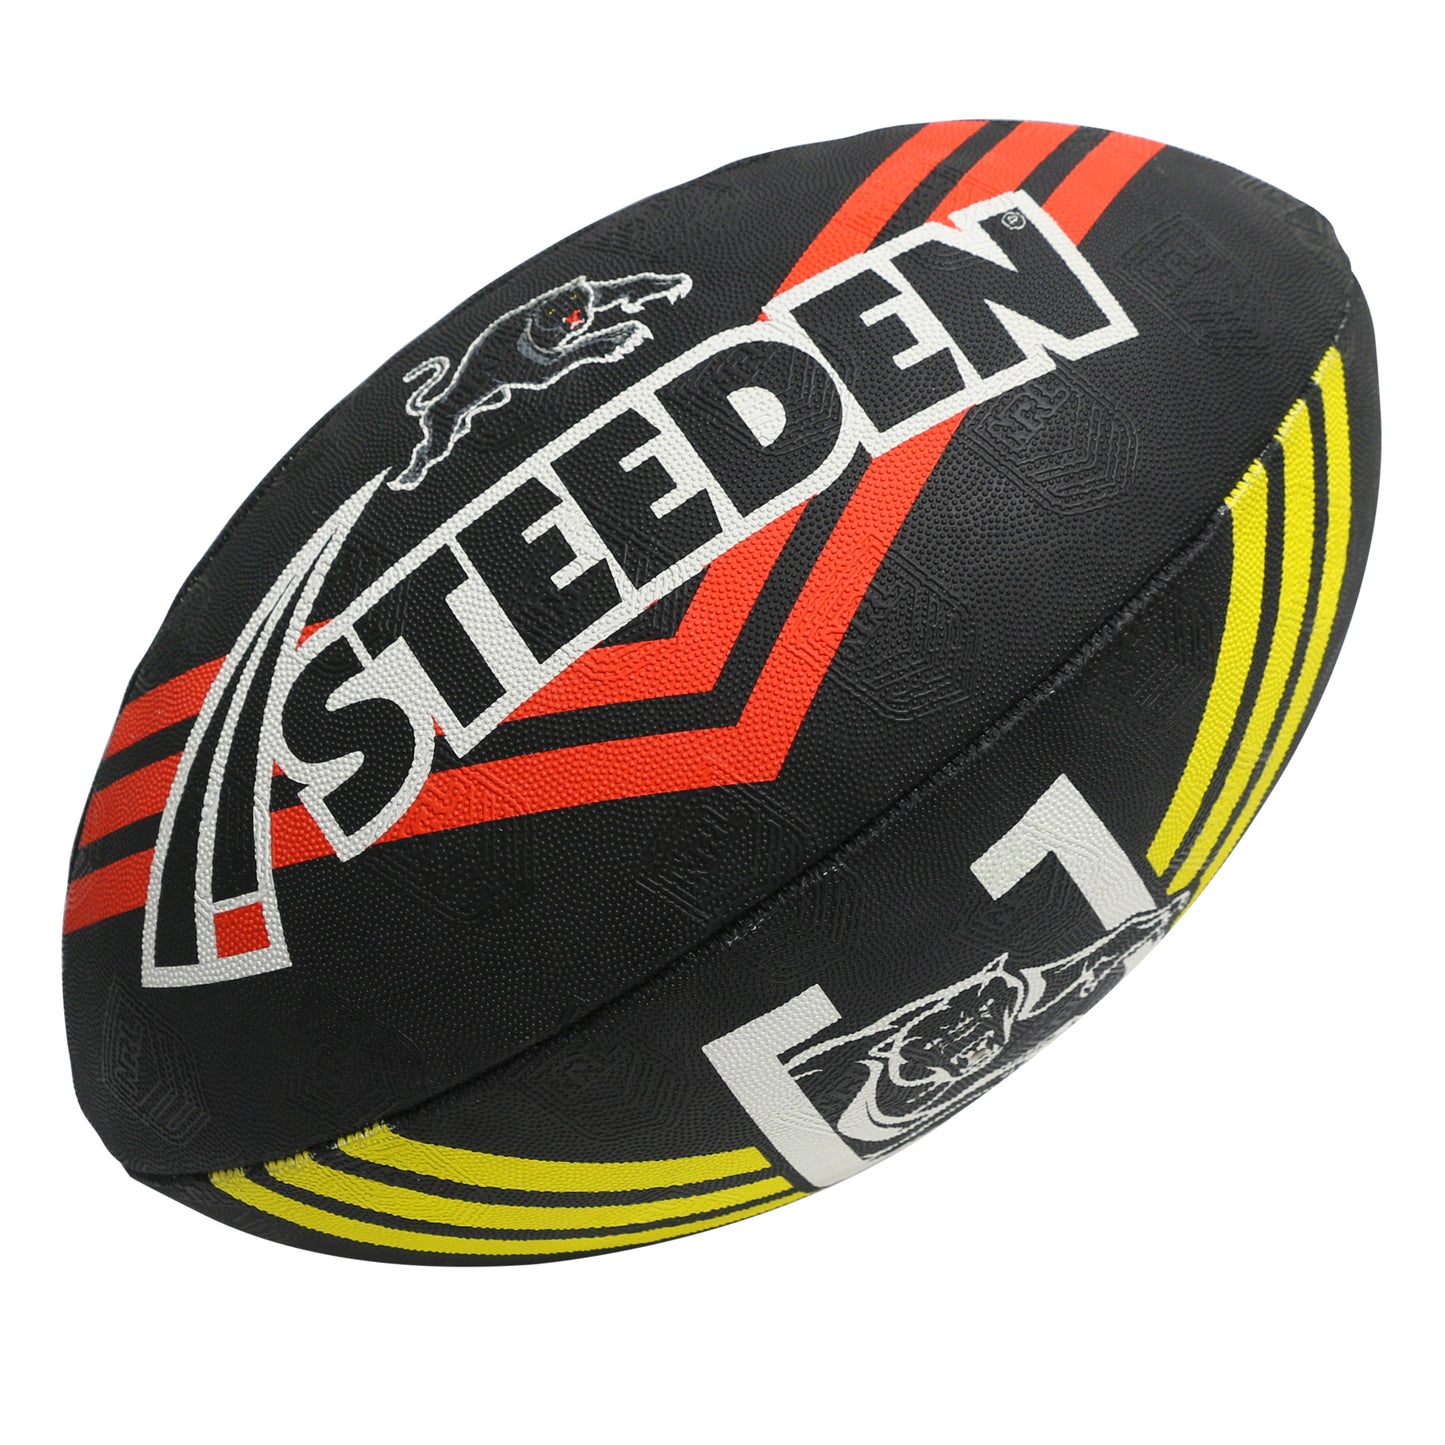 2023 NRL Panthers Supporter Ball (11 inch)